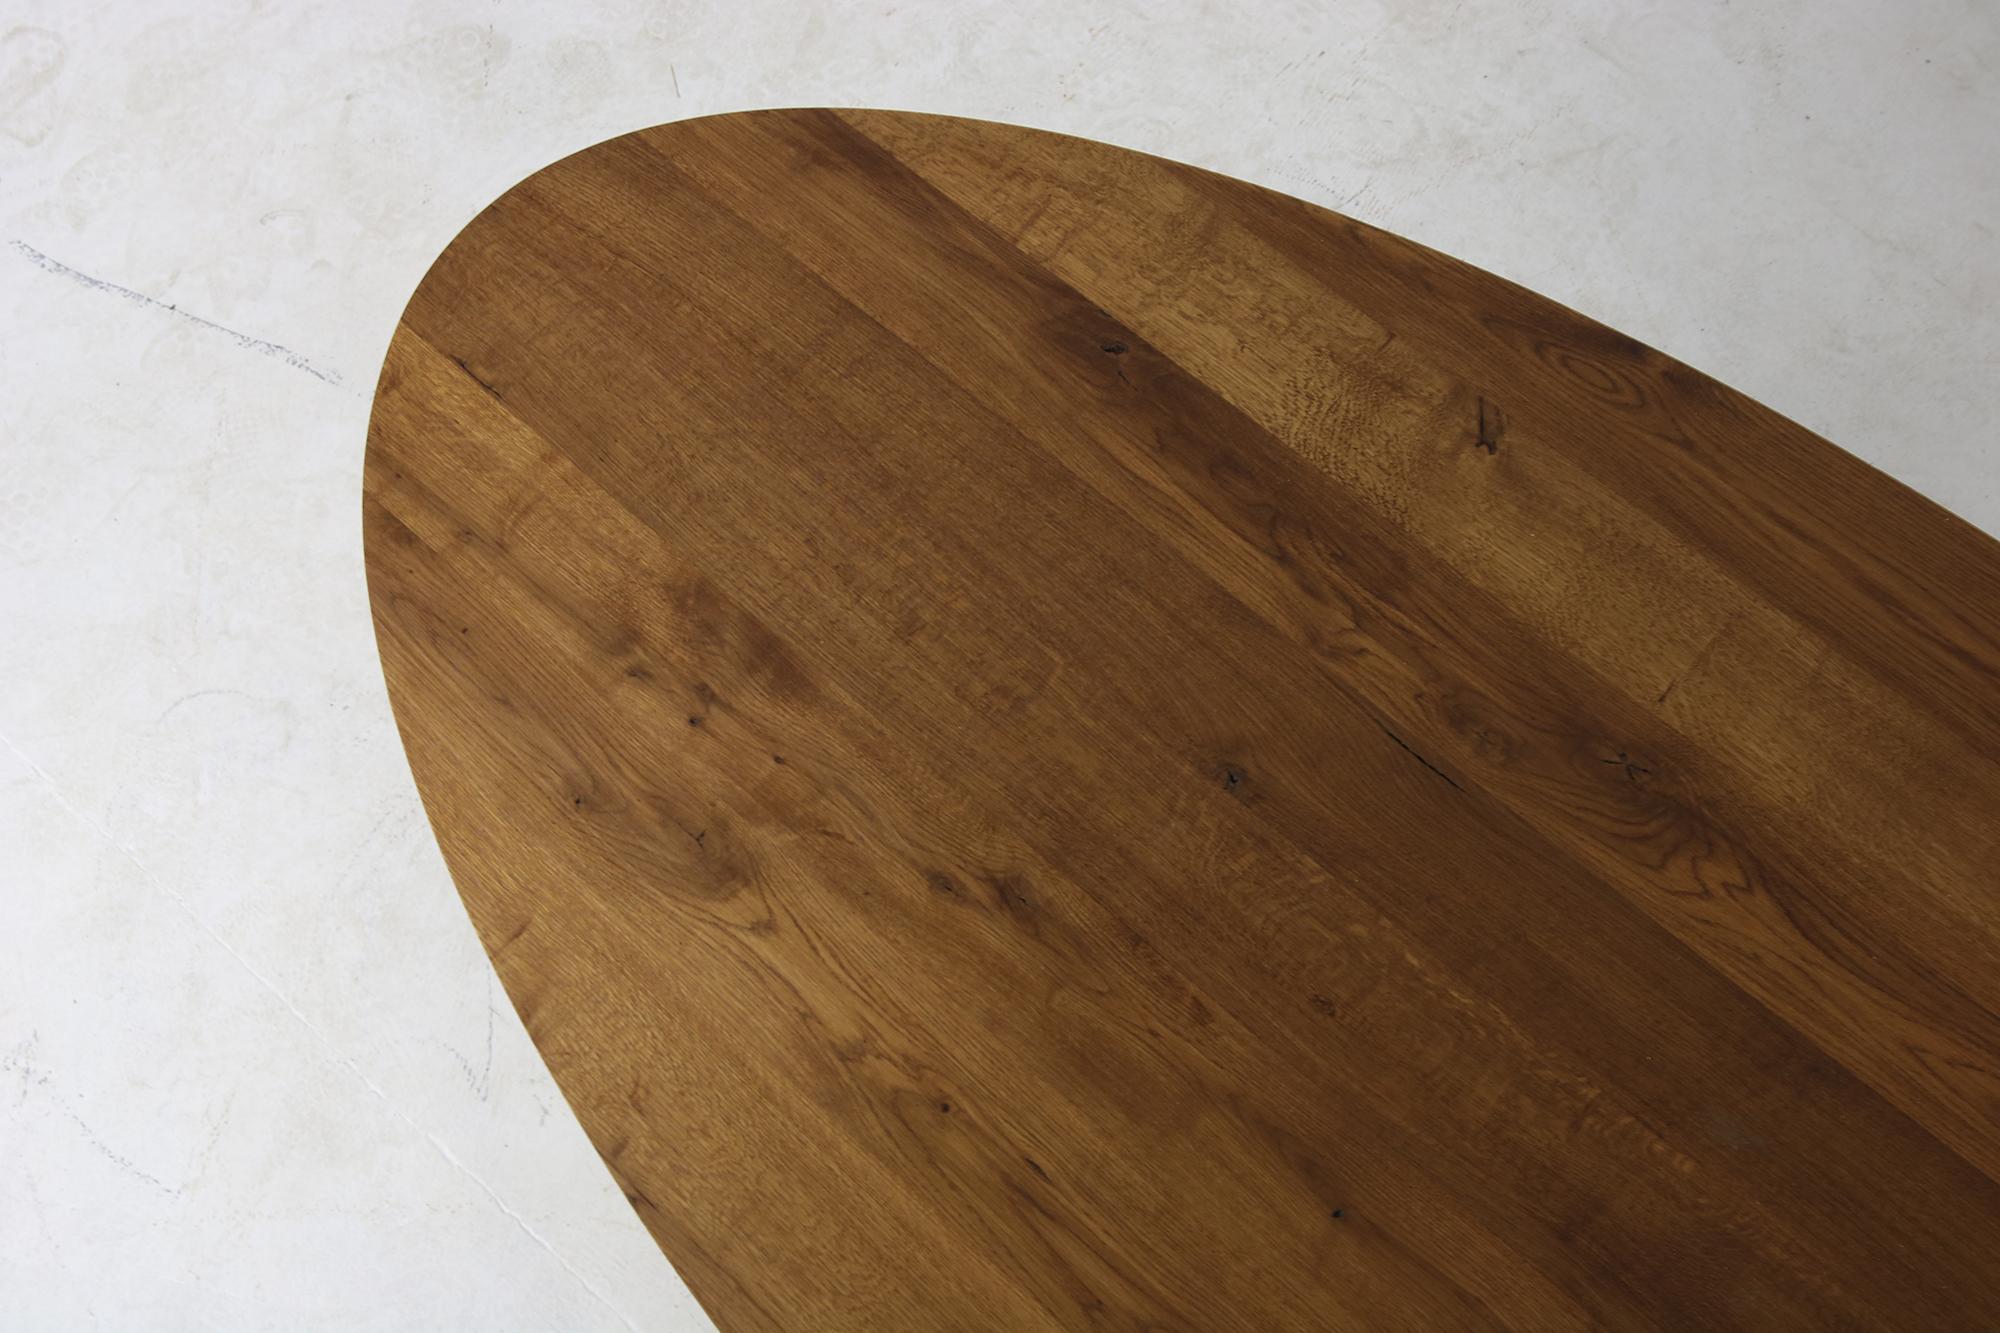 Modern Dining Room Oval Table Solid Oak, Contemporary Nathan Lindberg Pedestal C In Good Condition For Sale In Hamminkeln, DE